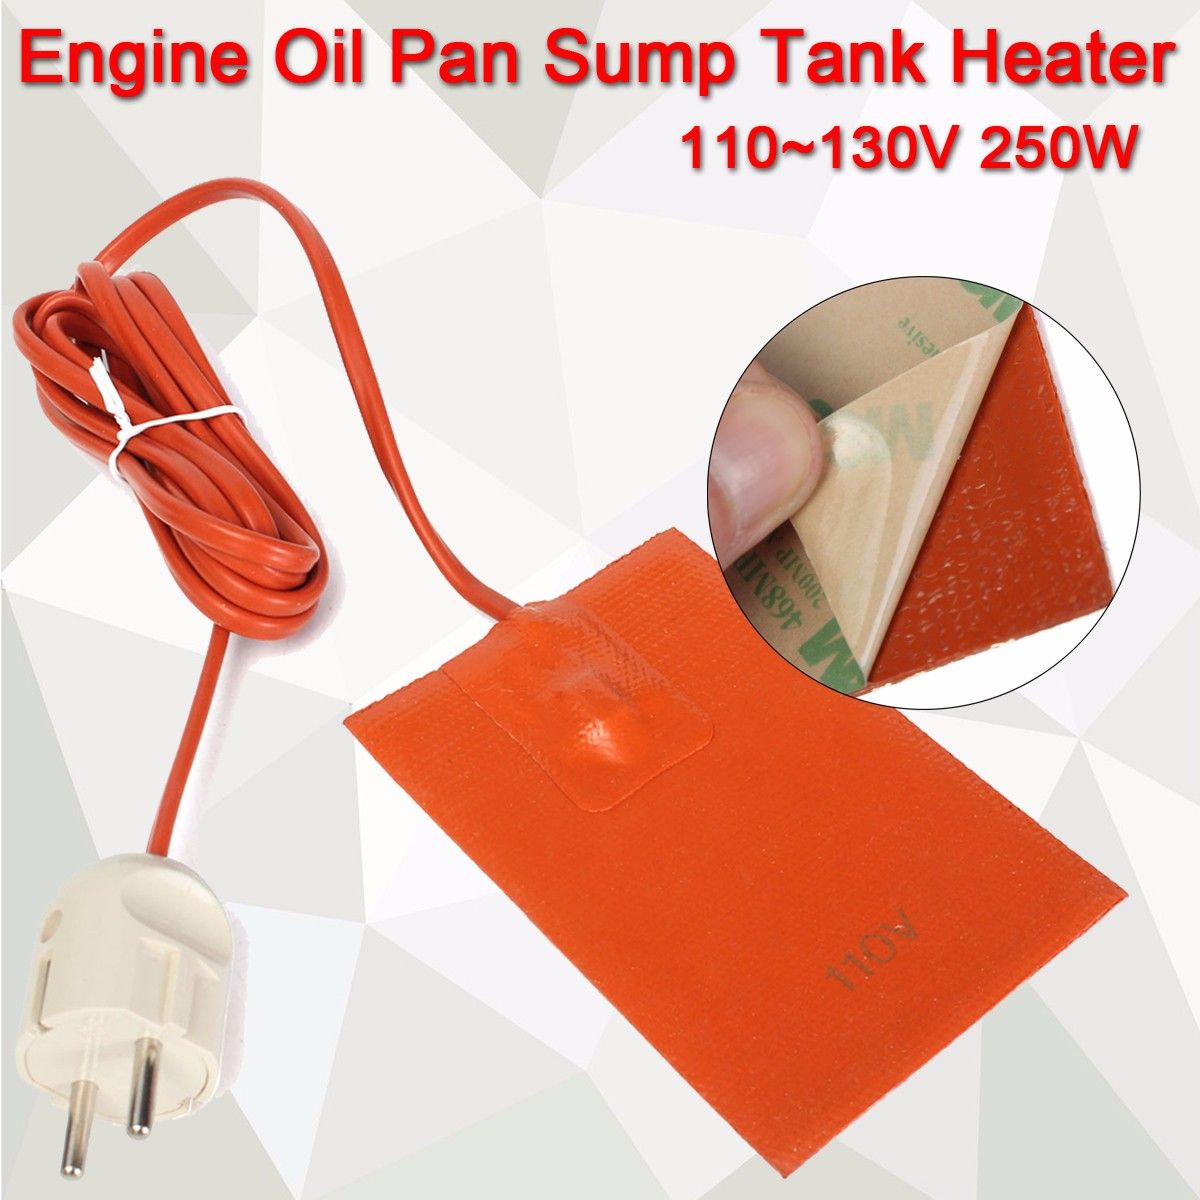 Engine-Oil-Pan-Sump-Tank-Heater-110130V-250W-Protection-Reduce-Wear-US-1363274